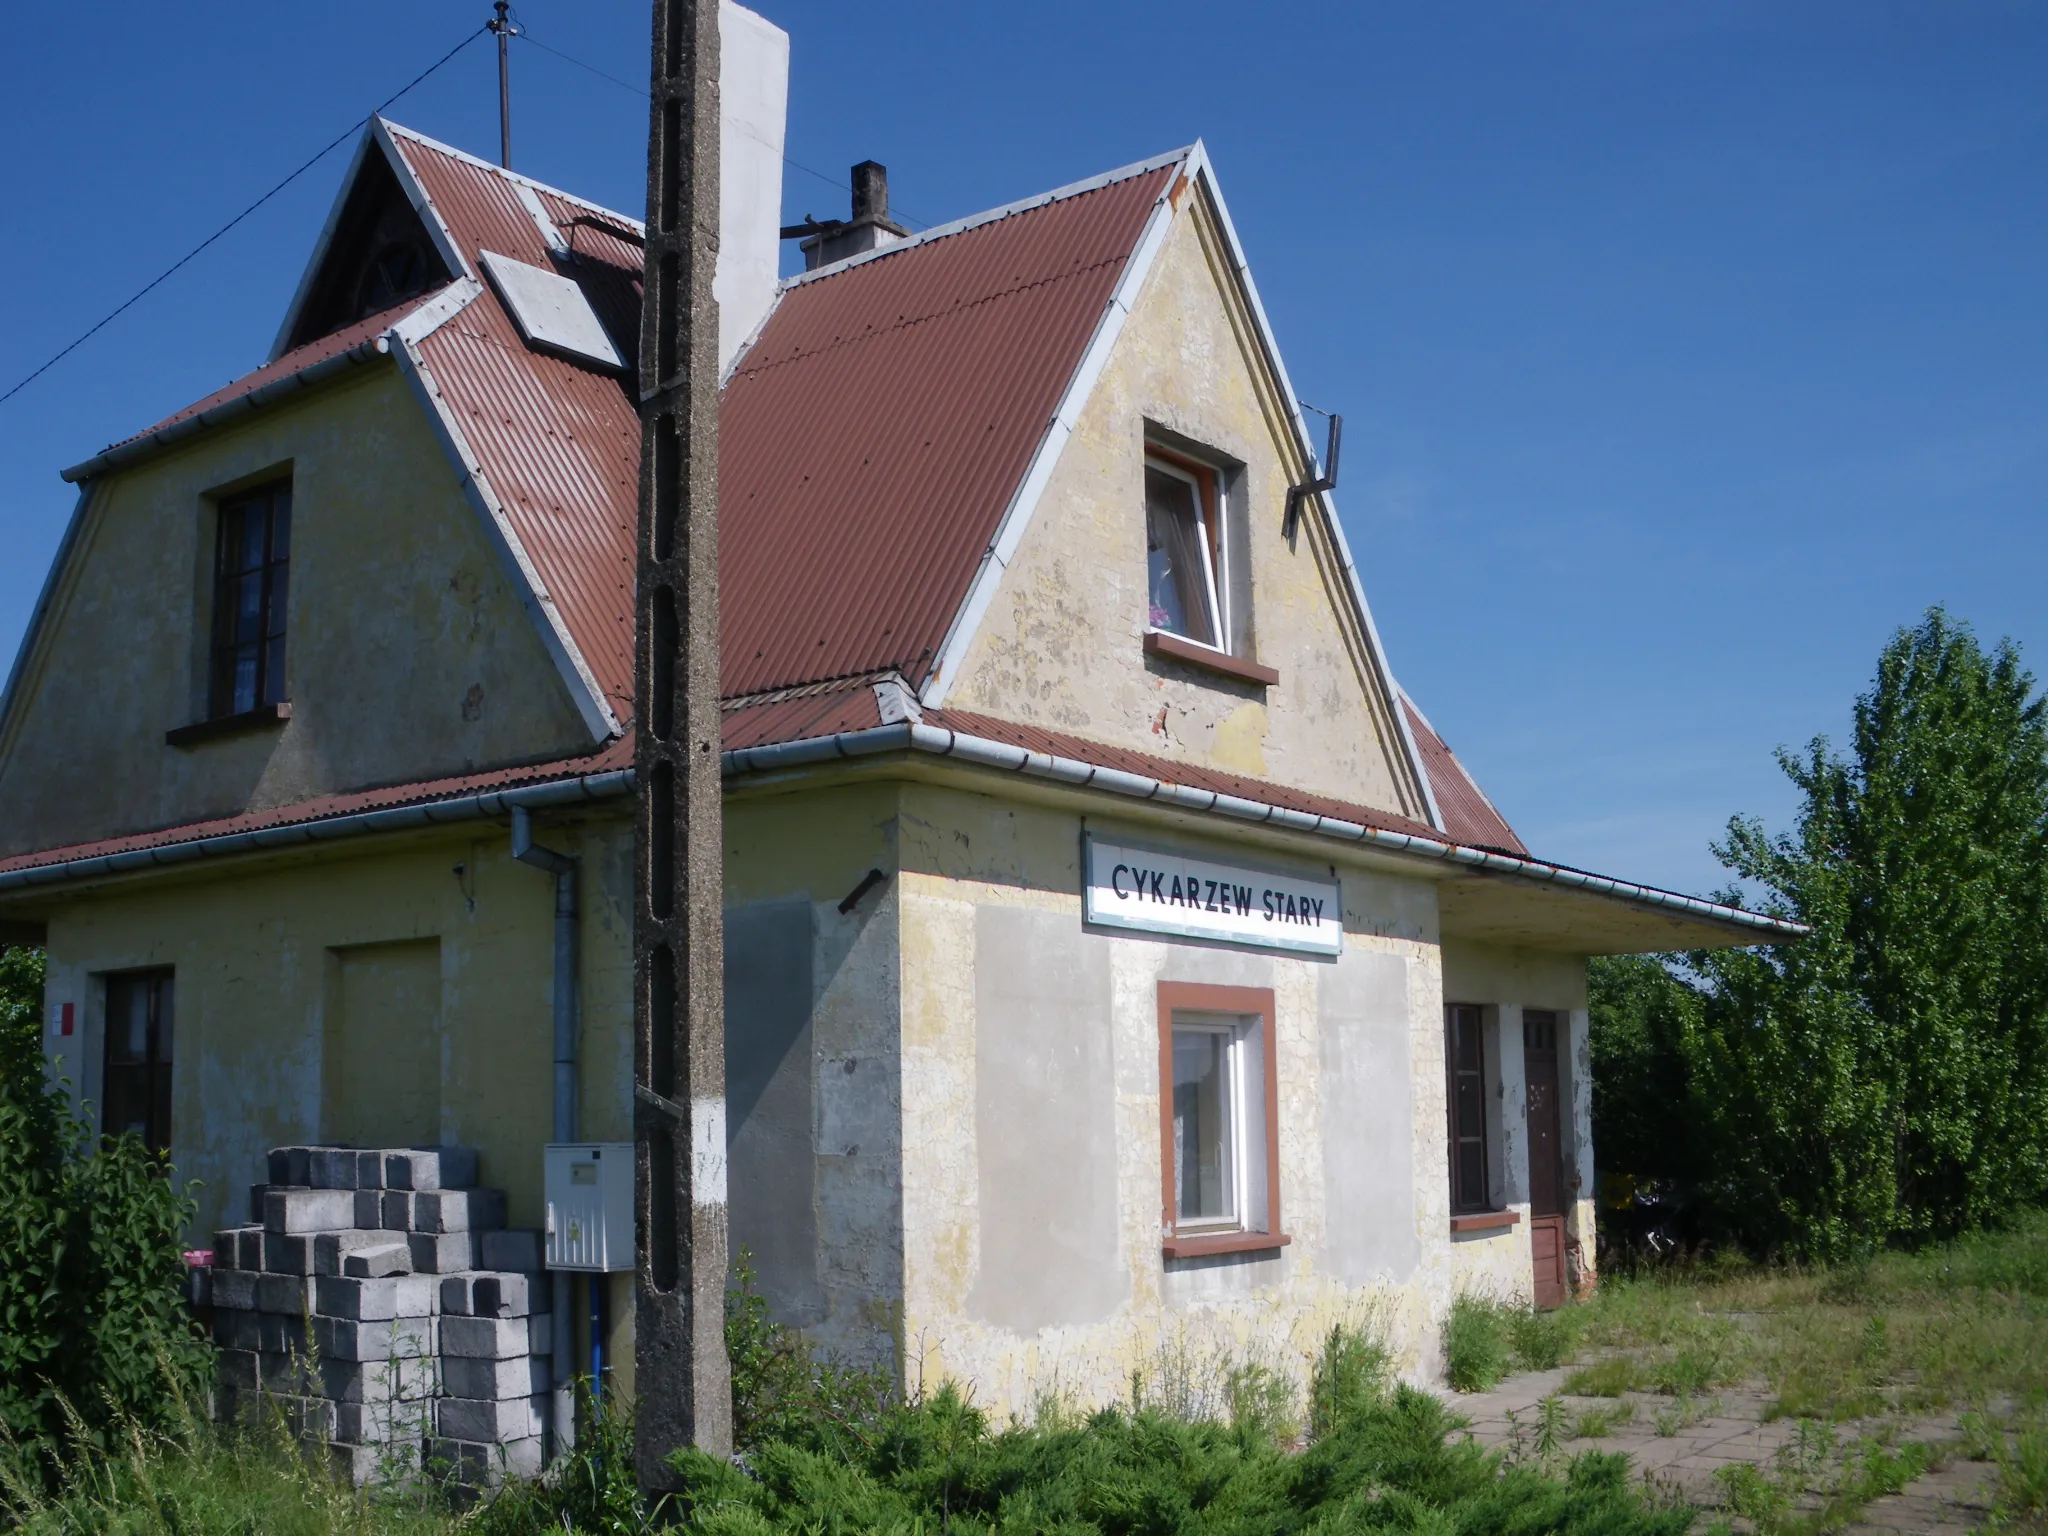 Photo showing: Train stop in Cykarzew Stary.